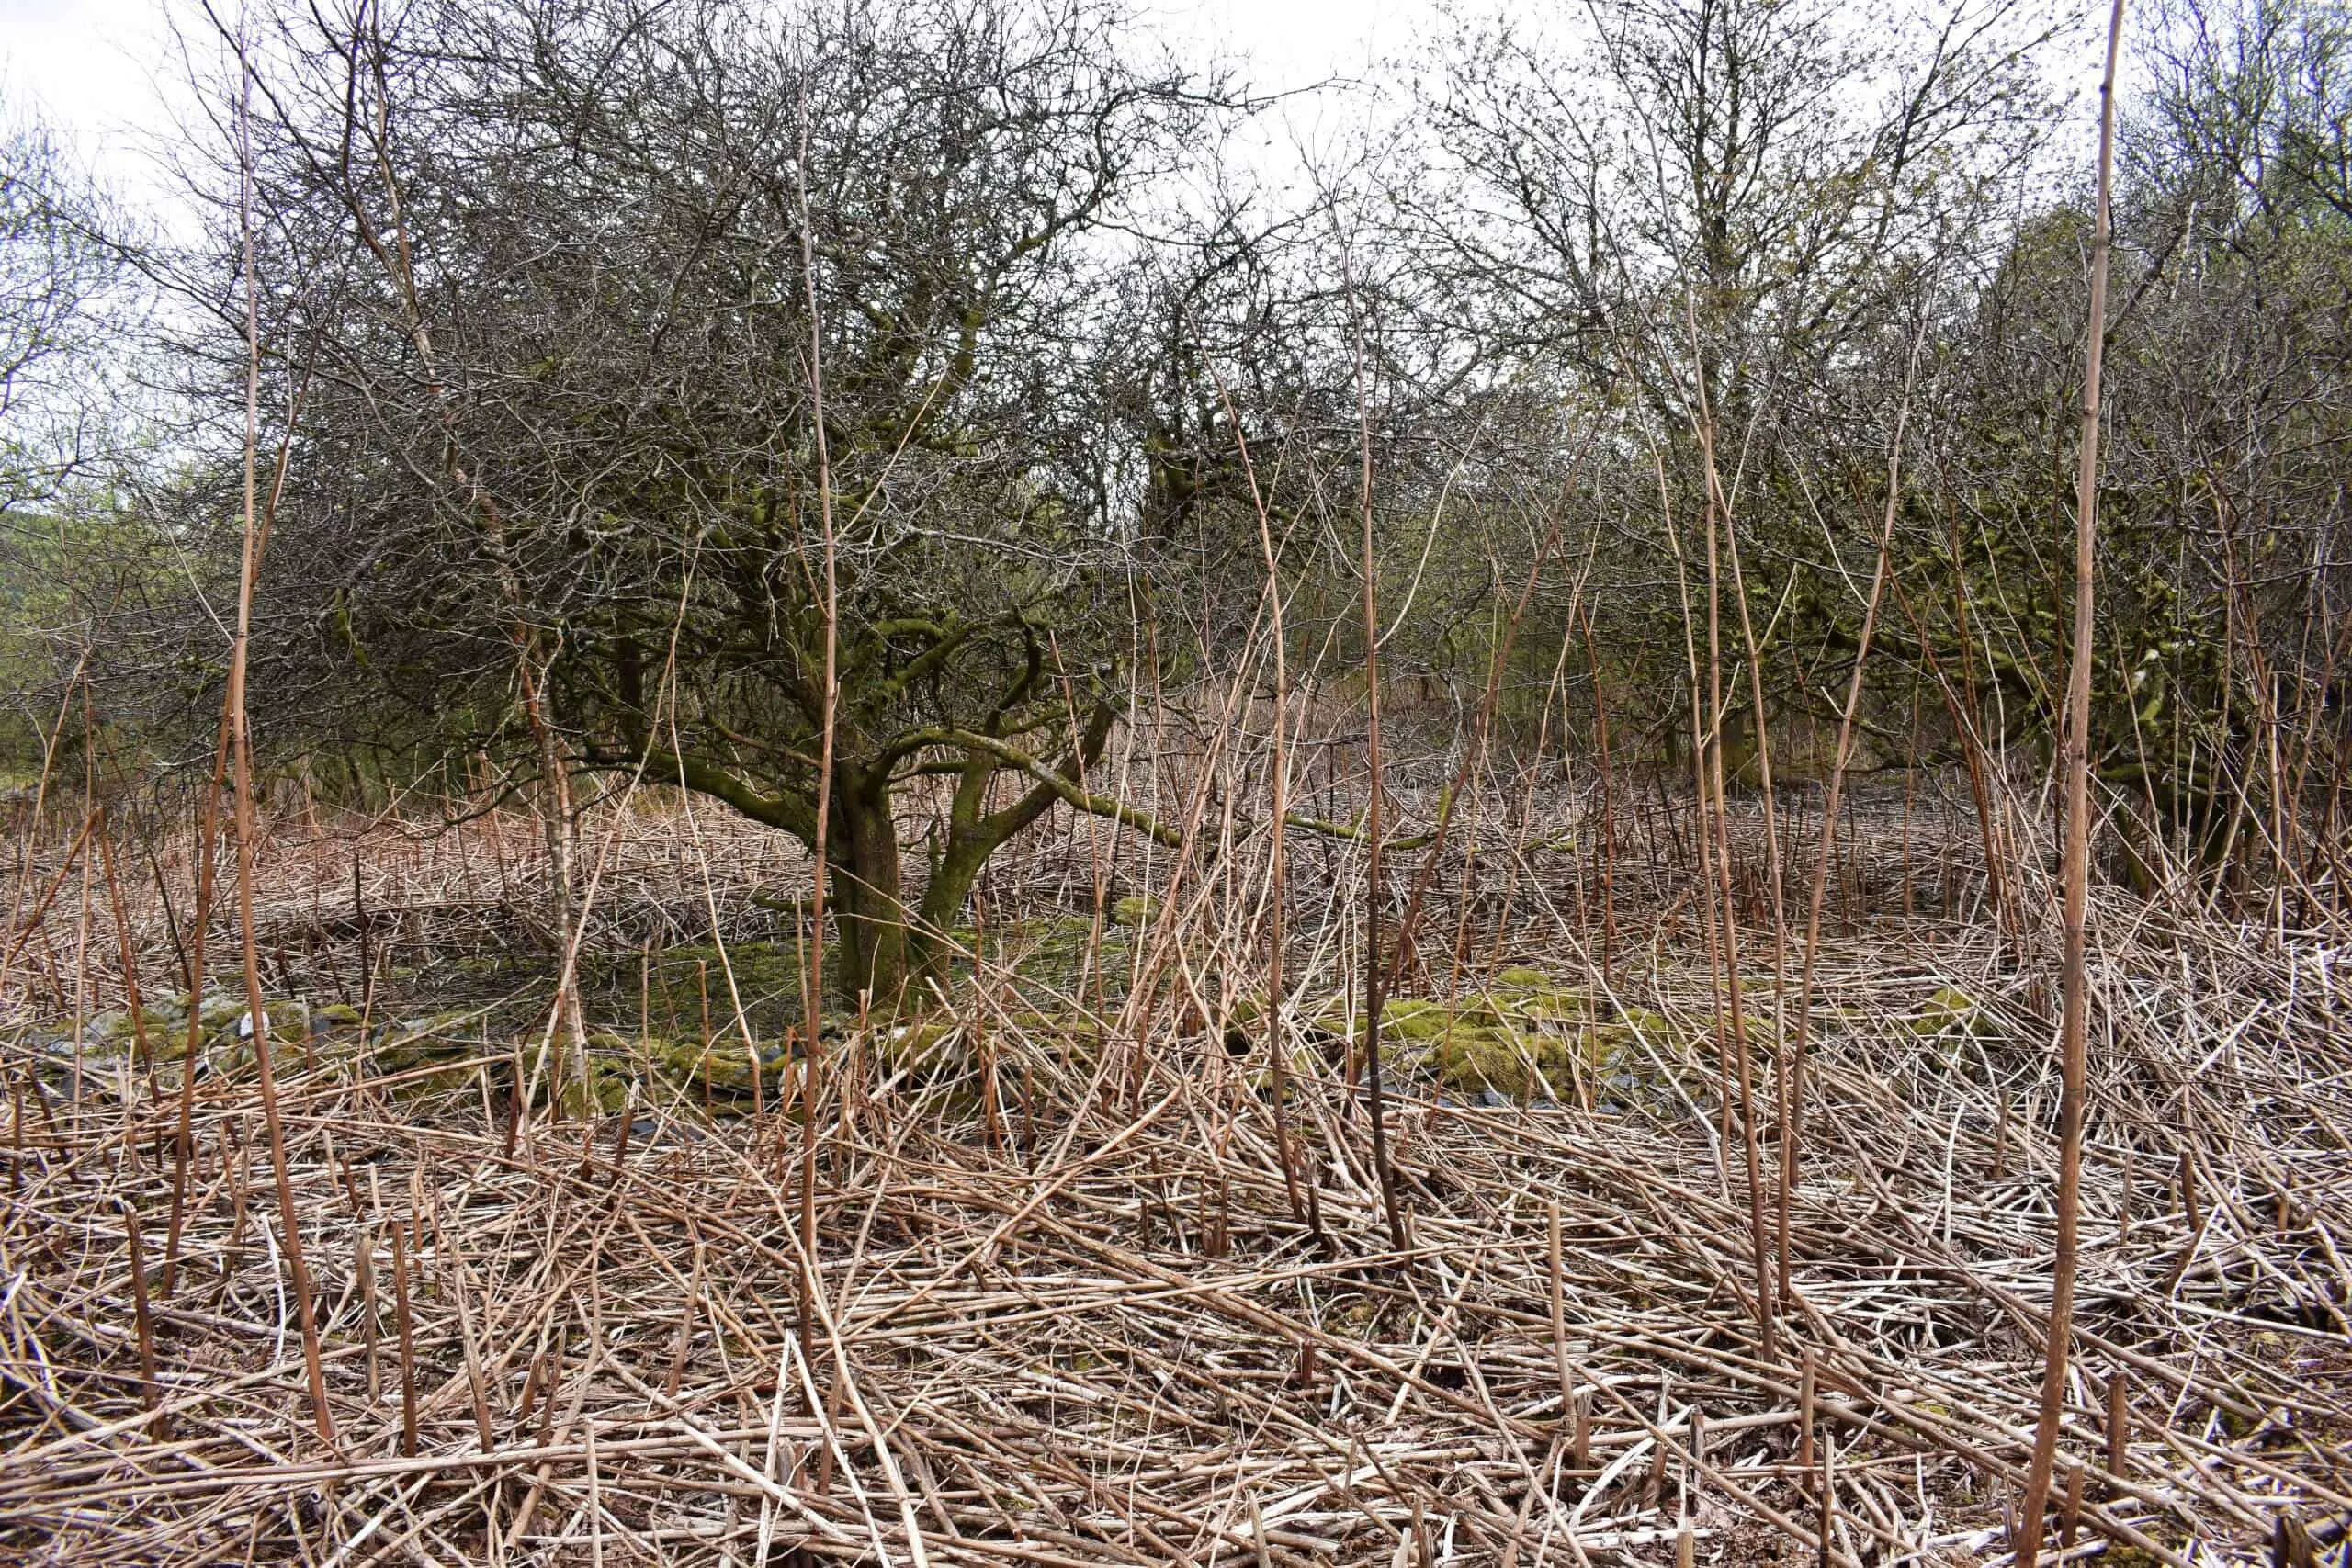 Japanese knotweed in winter dies back but leaves its distinguishable brown hollow stems littered in the area it has occupied ready for the following season